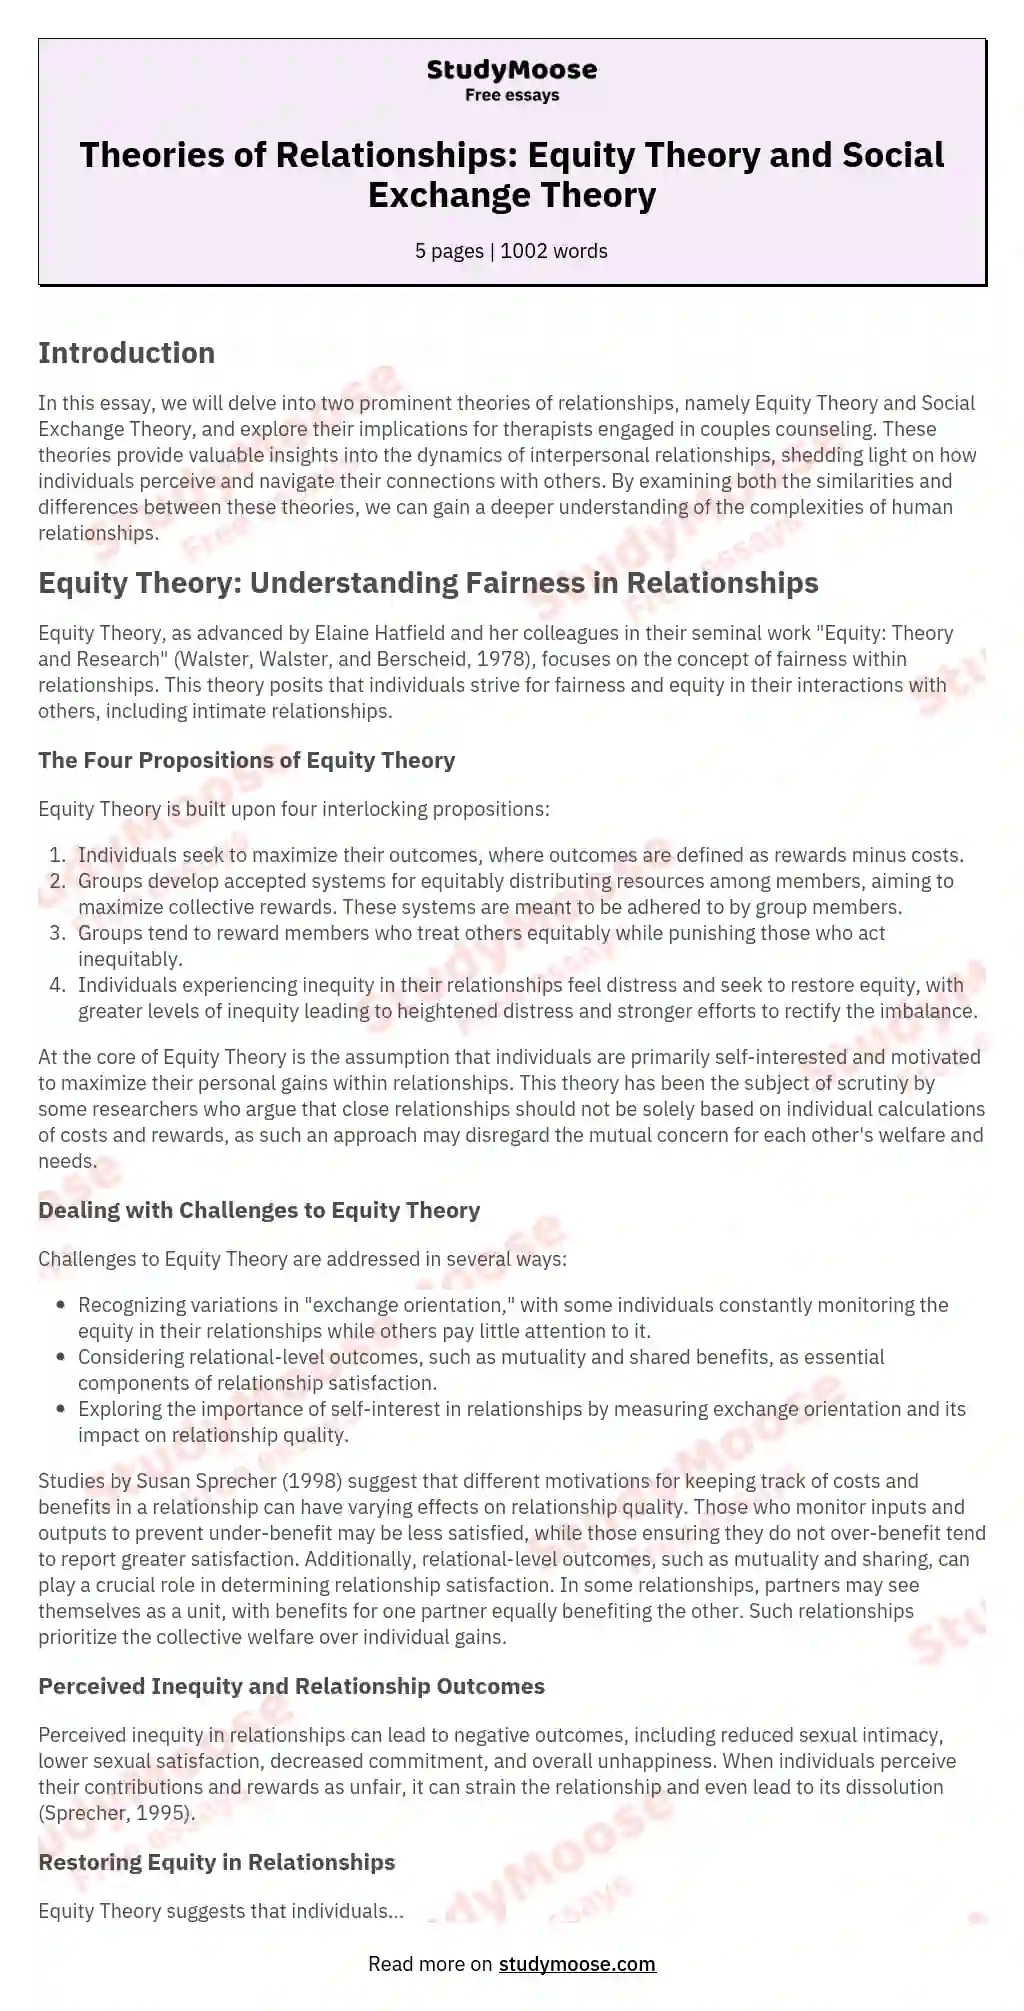 Theories of Relationships: Equity Theory and Social Exchange Theory essay